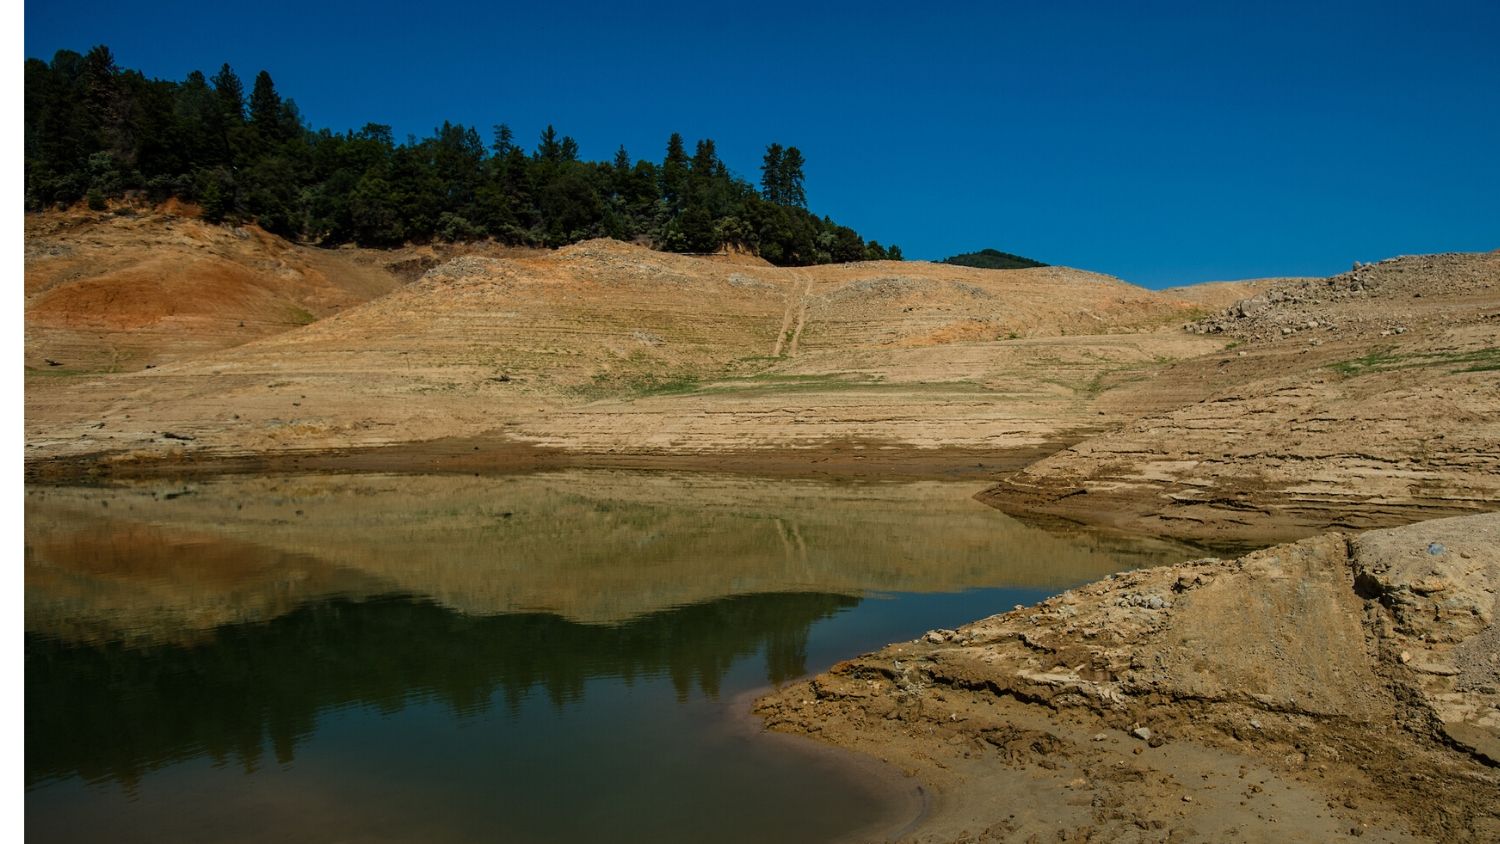 Shasta Lake during a drought in California.